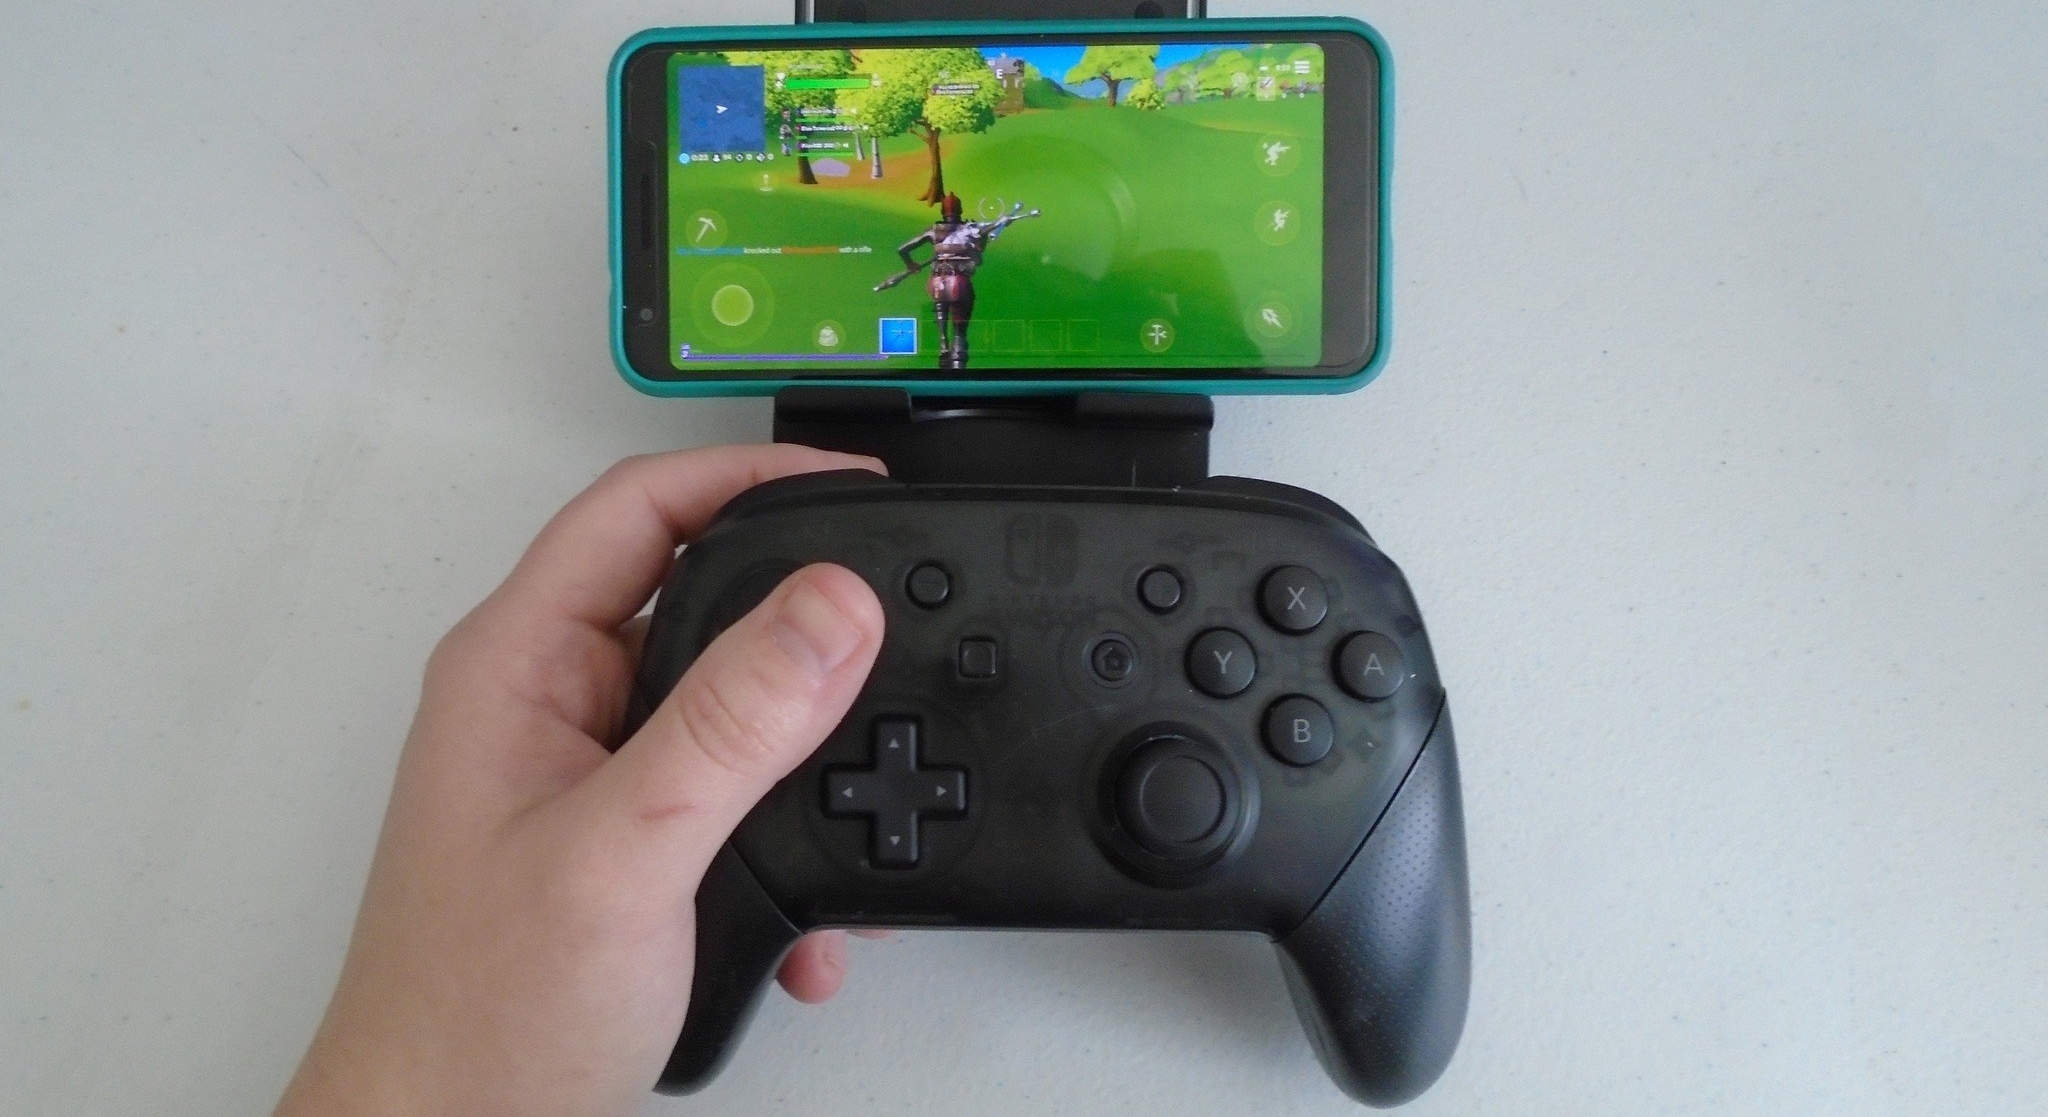 Nintendo Switch Pro Controller, Nintendo Switch Support